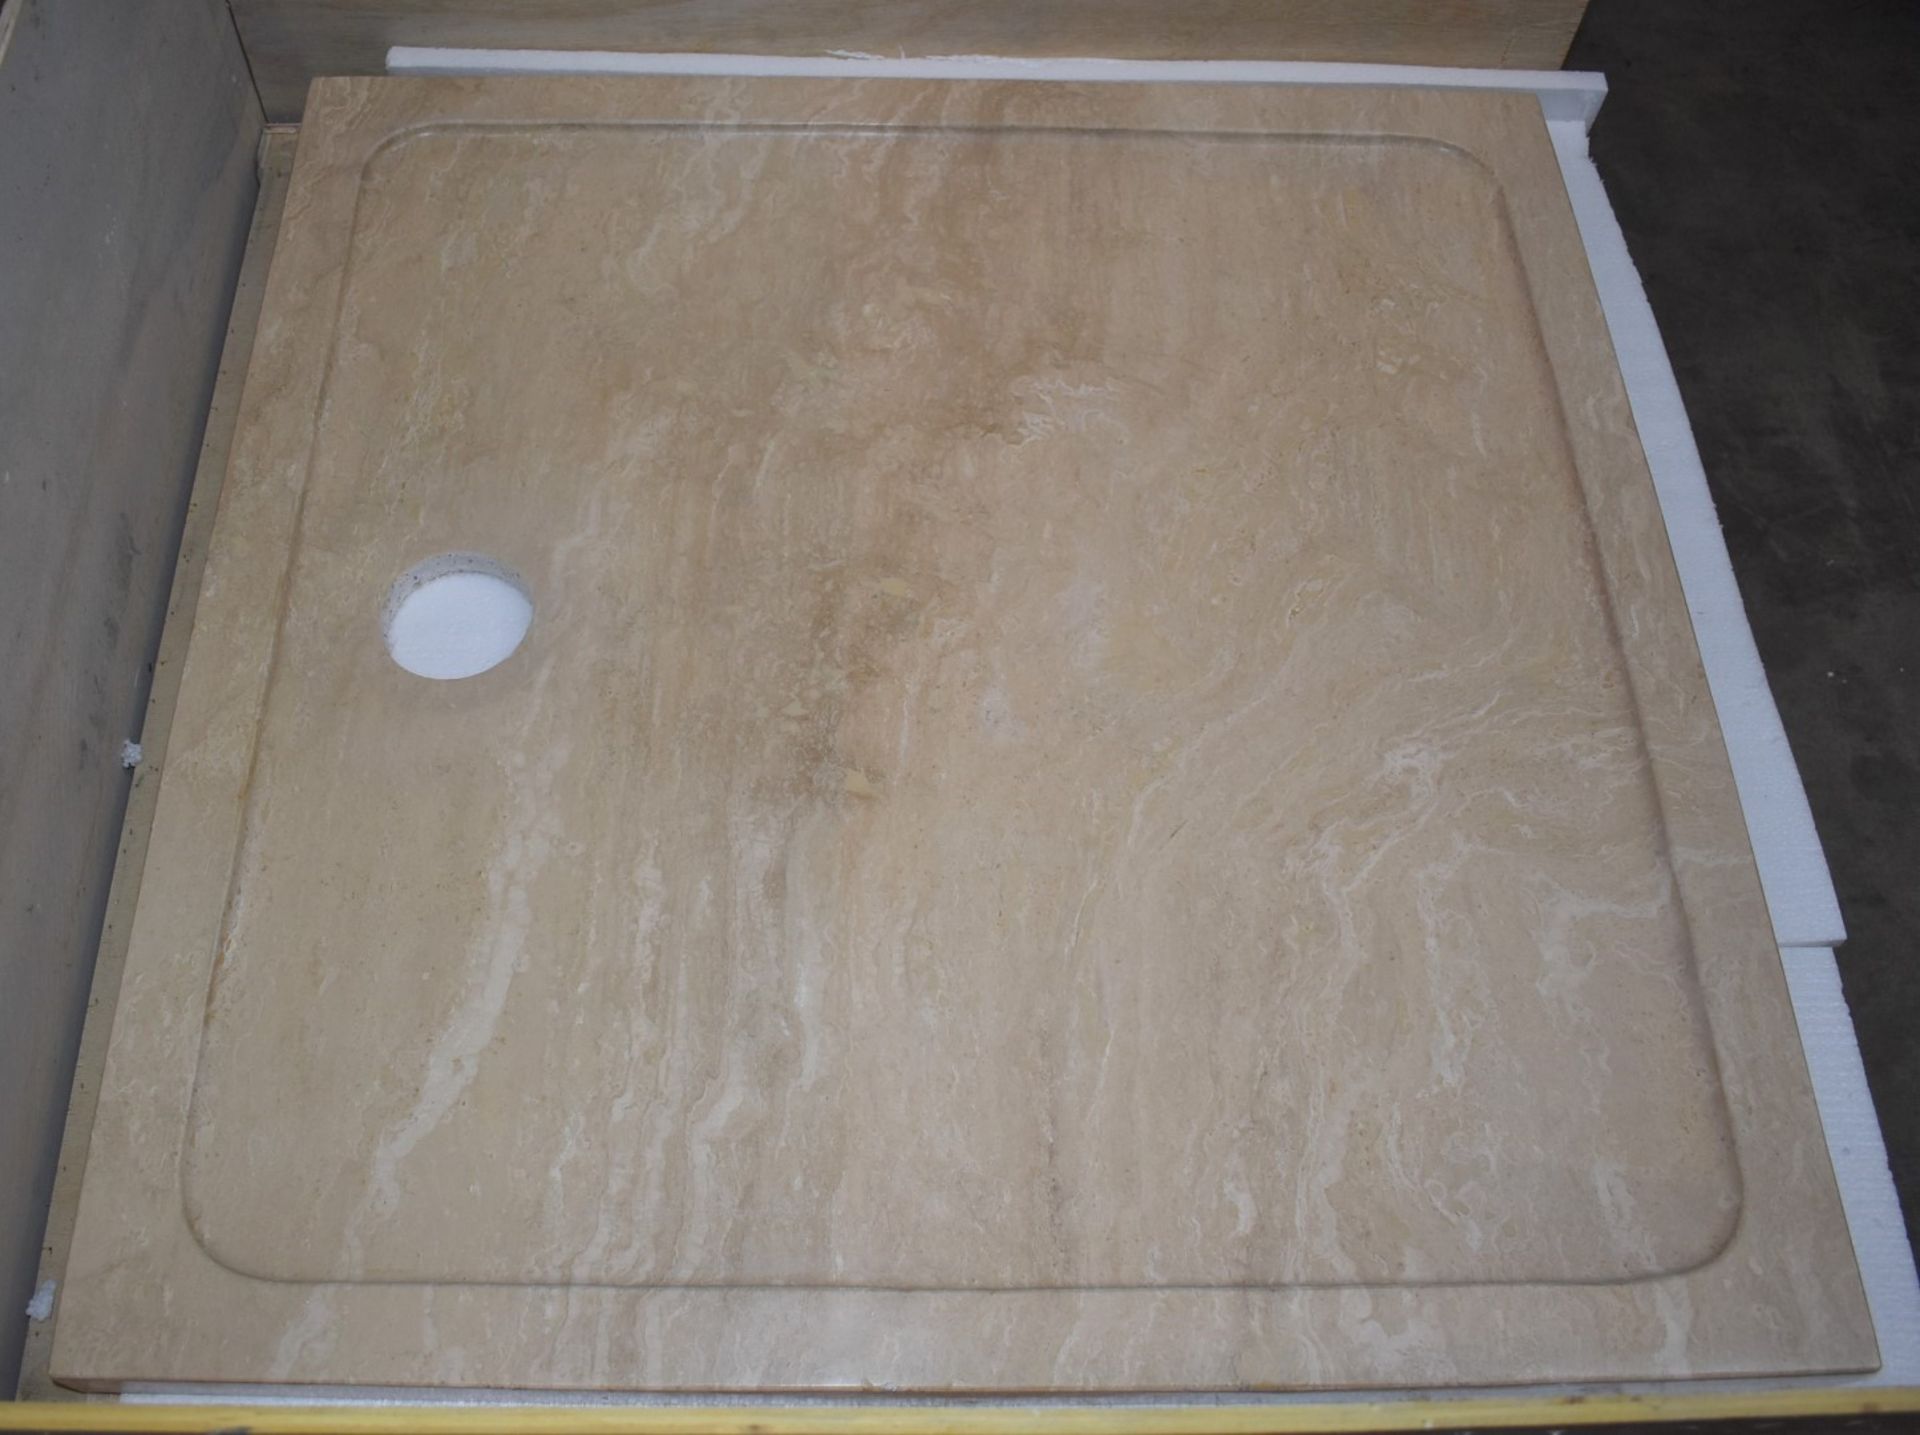 1 x Stonearth Luxury Solid Travertine Stone 900mm Shower Tray - Hand Made From Travertine Stone - Image 5 of 12